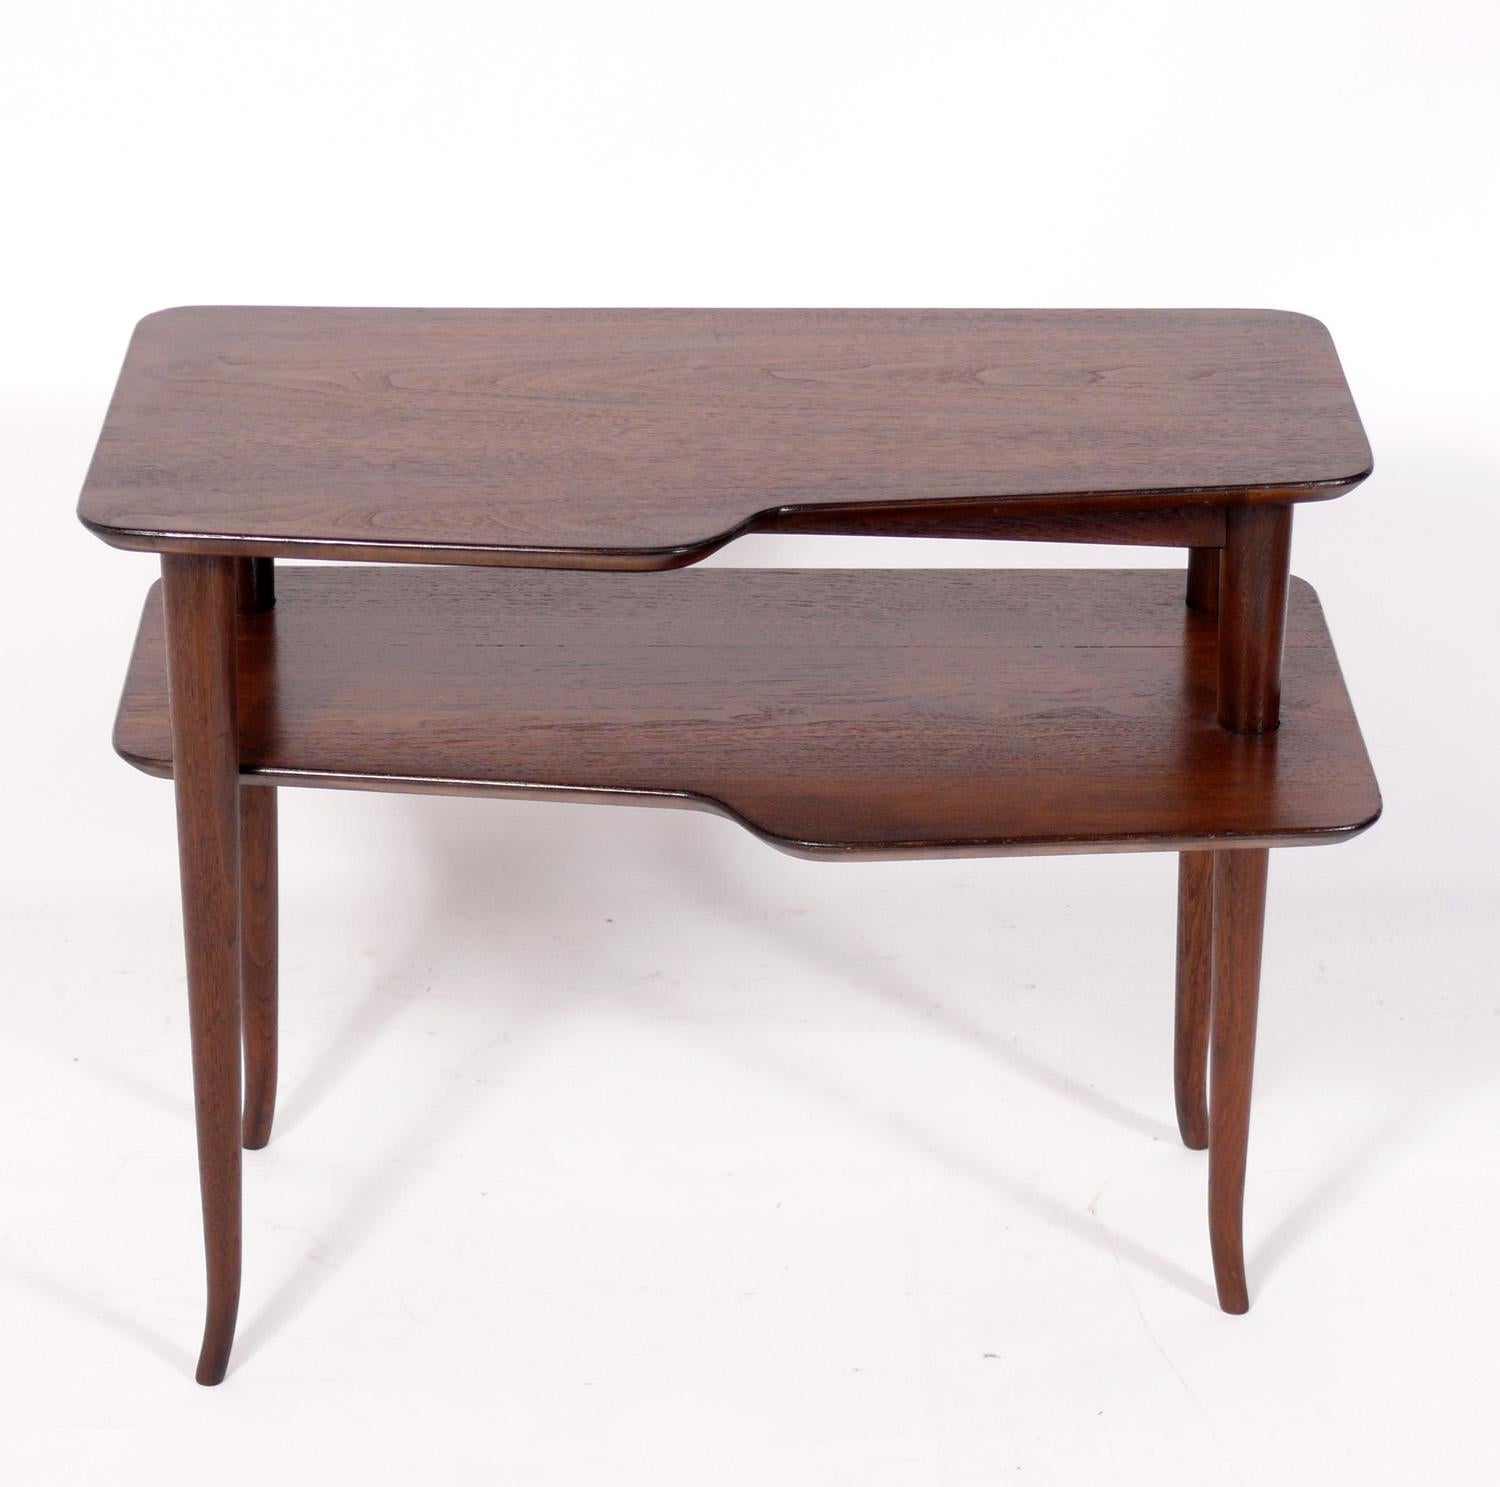 Elegant Italian end table or nightstand, attributed to Paolo Buffa, unsigned, Italy, circa 1950s. This piece is a versatile size and can be used as an end or side table, or as a nightstand.